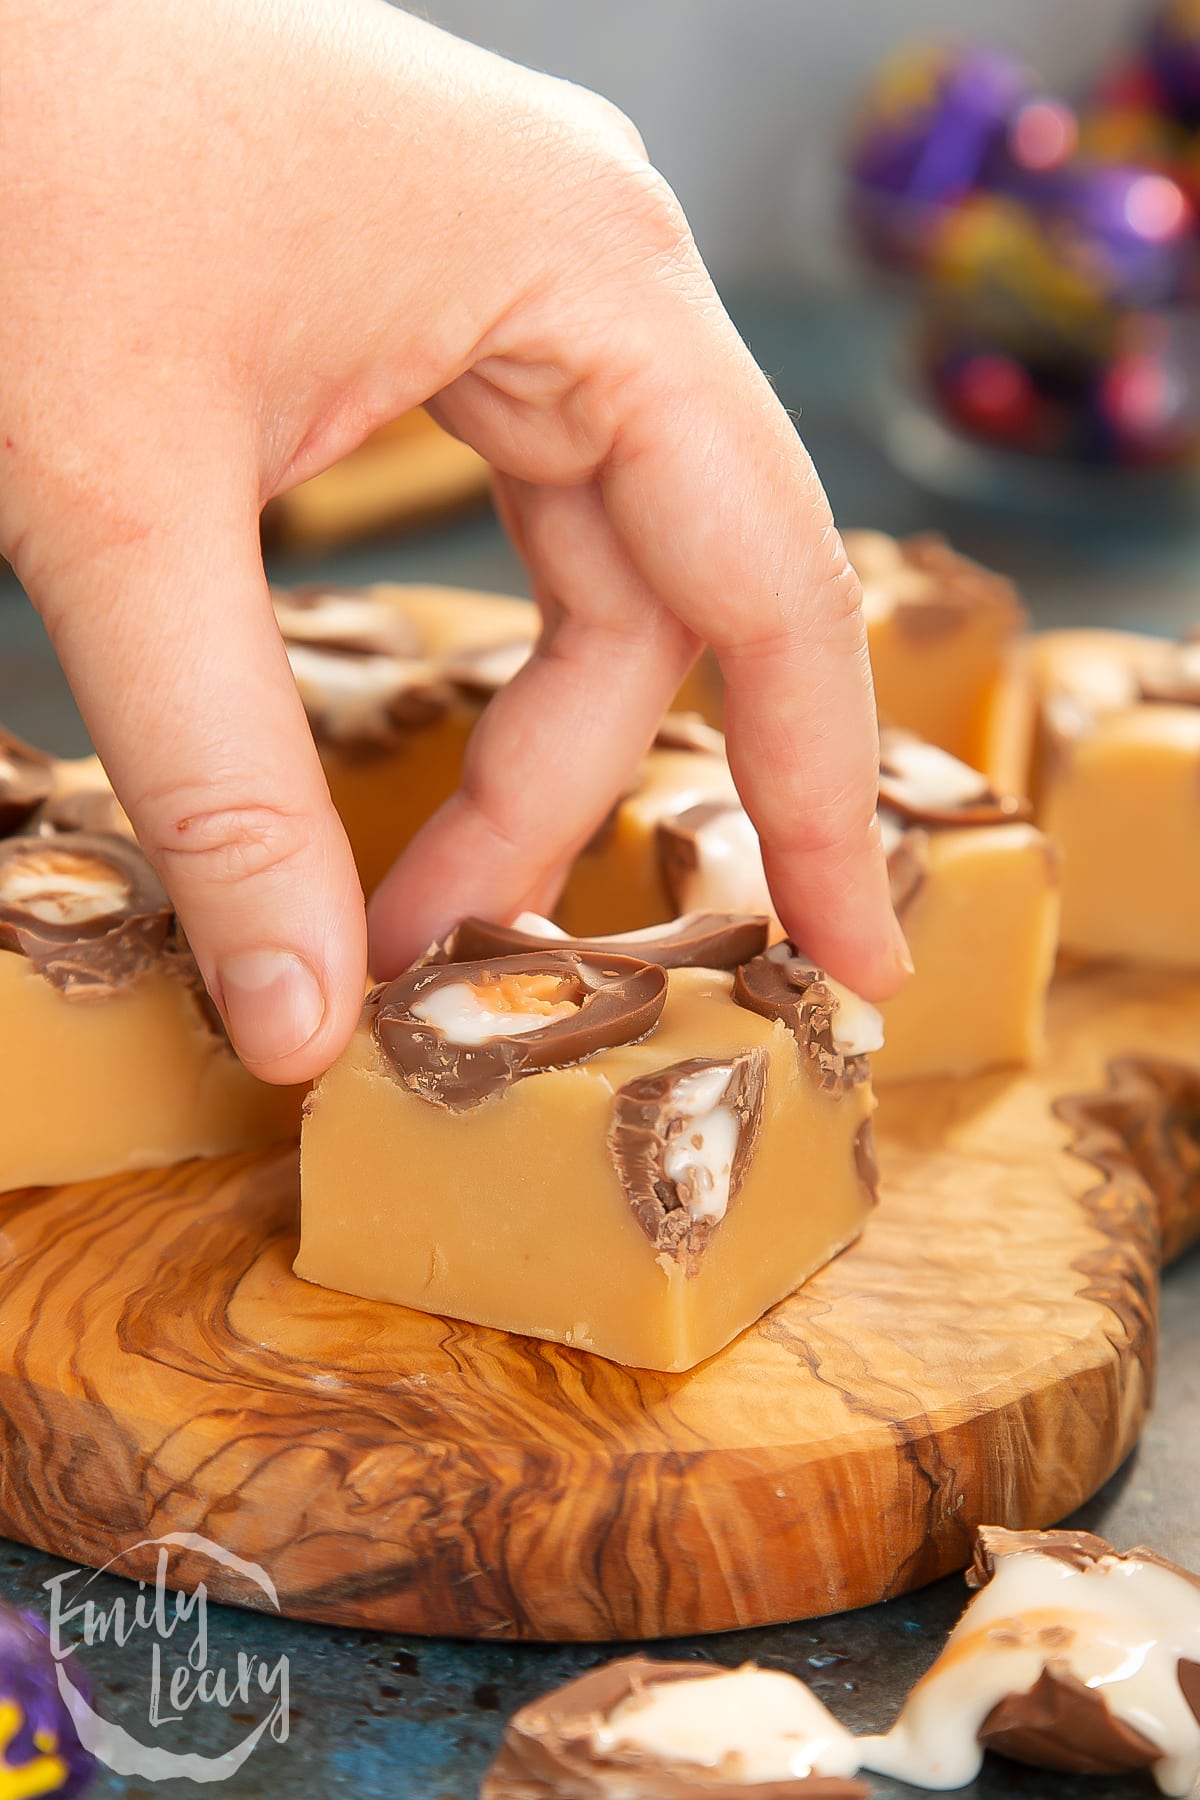 Hand reaching in to grab a piece of the finished Cadbury Creme Egg fudge